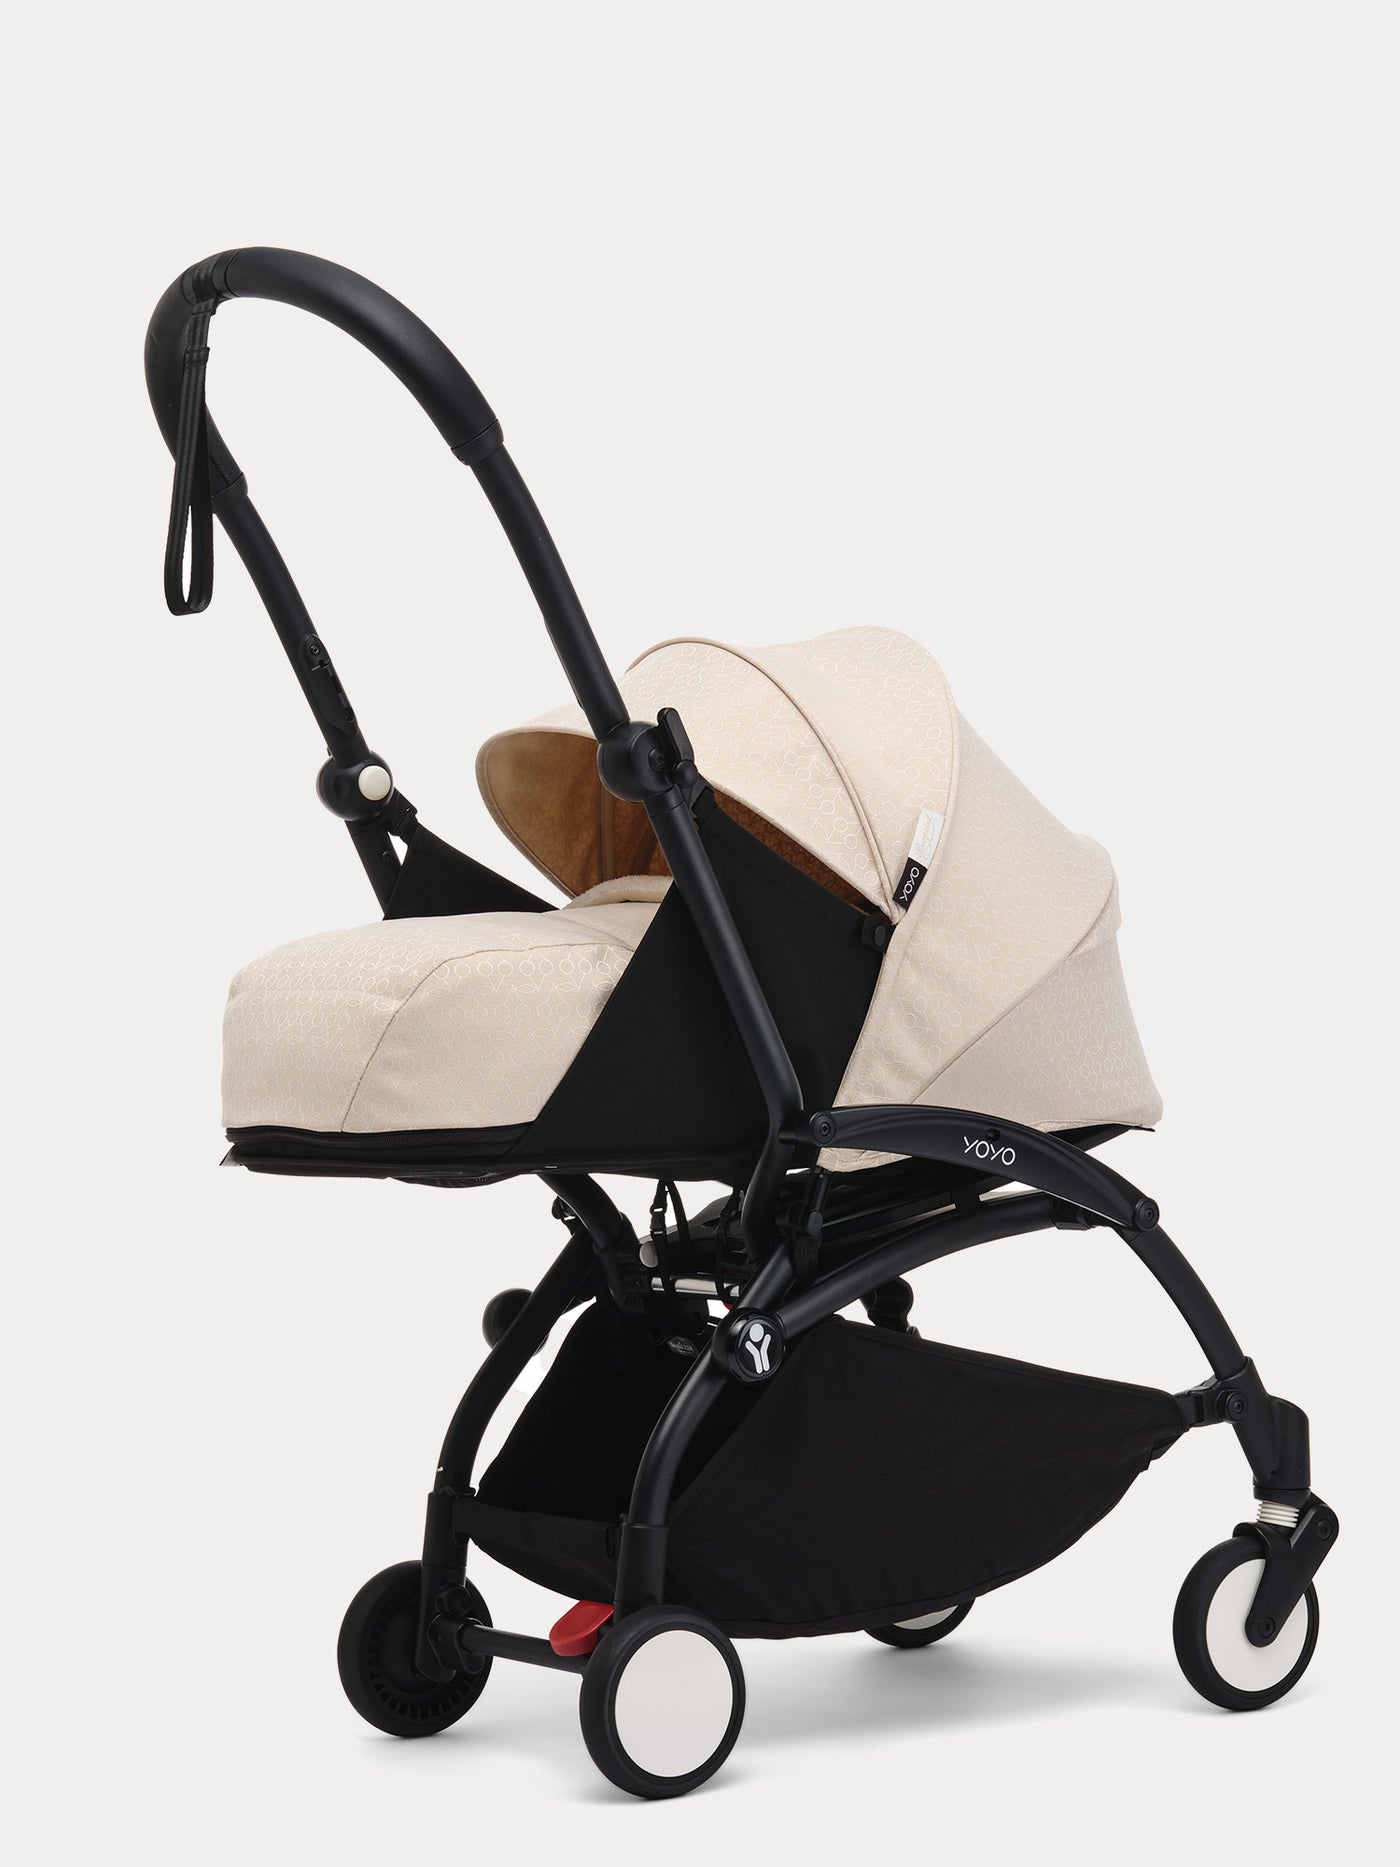 stroller from birth to early childhood Bonpoint x YOYO®